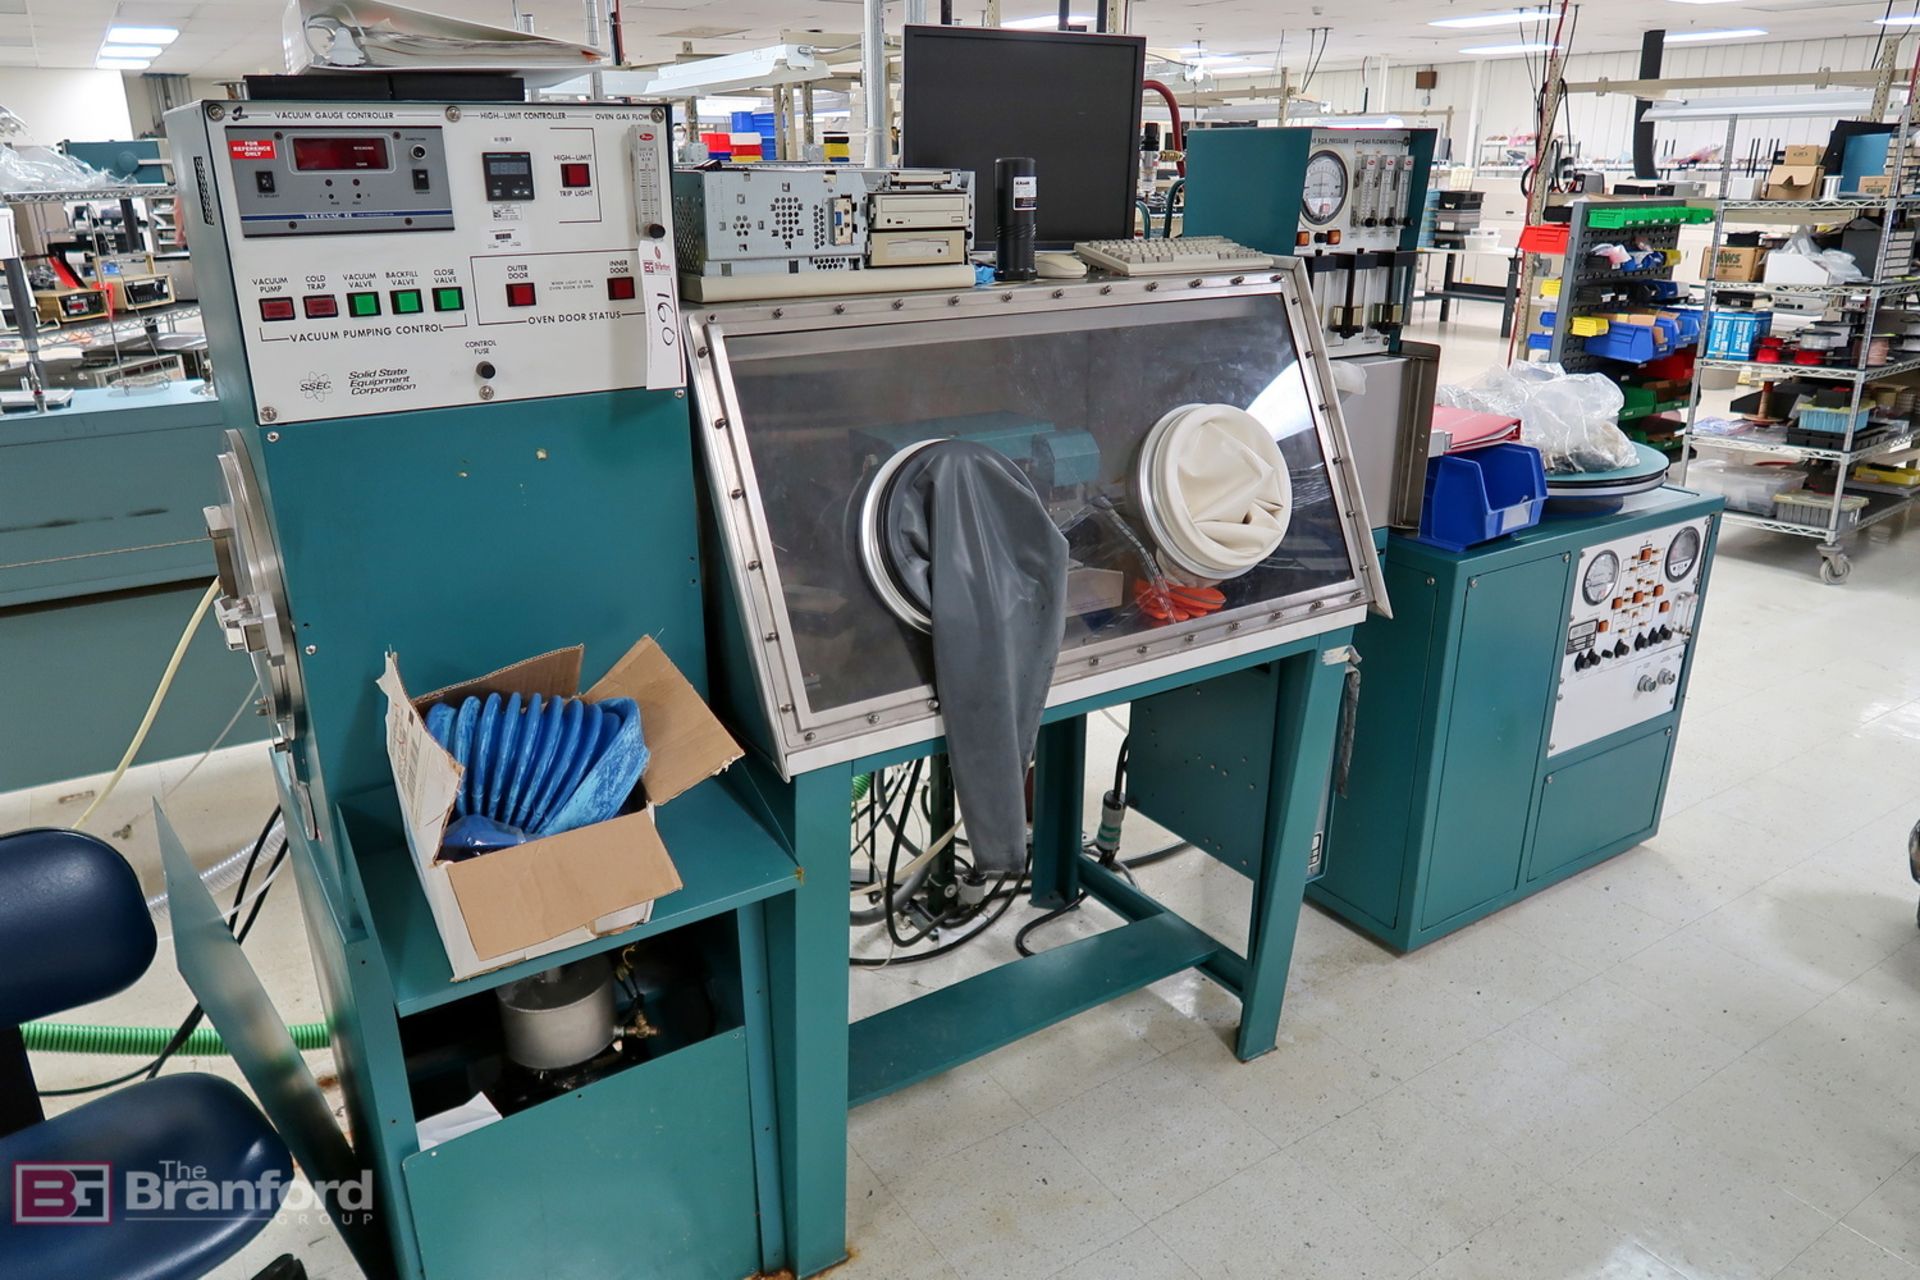 Solid State Equipment Corp (SSEC) GDO-600-2